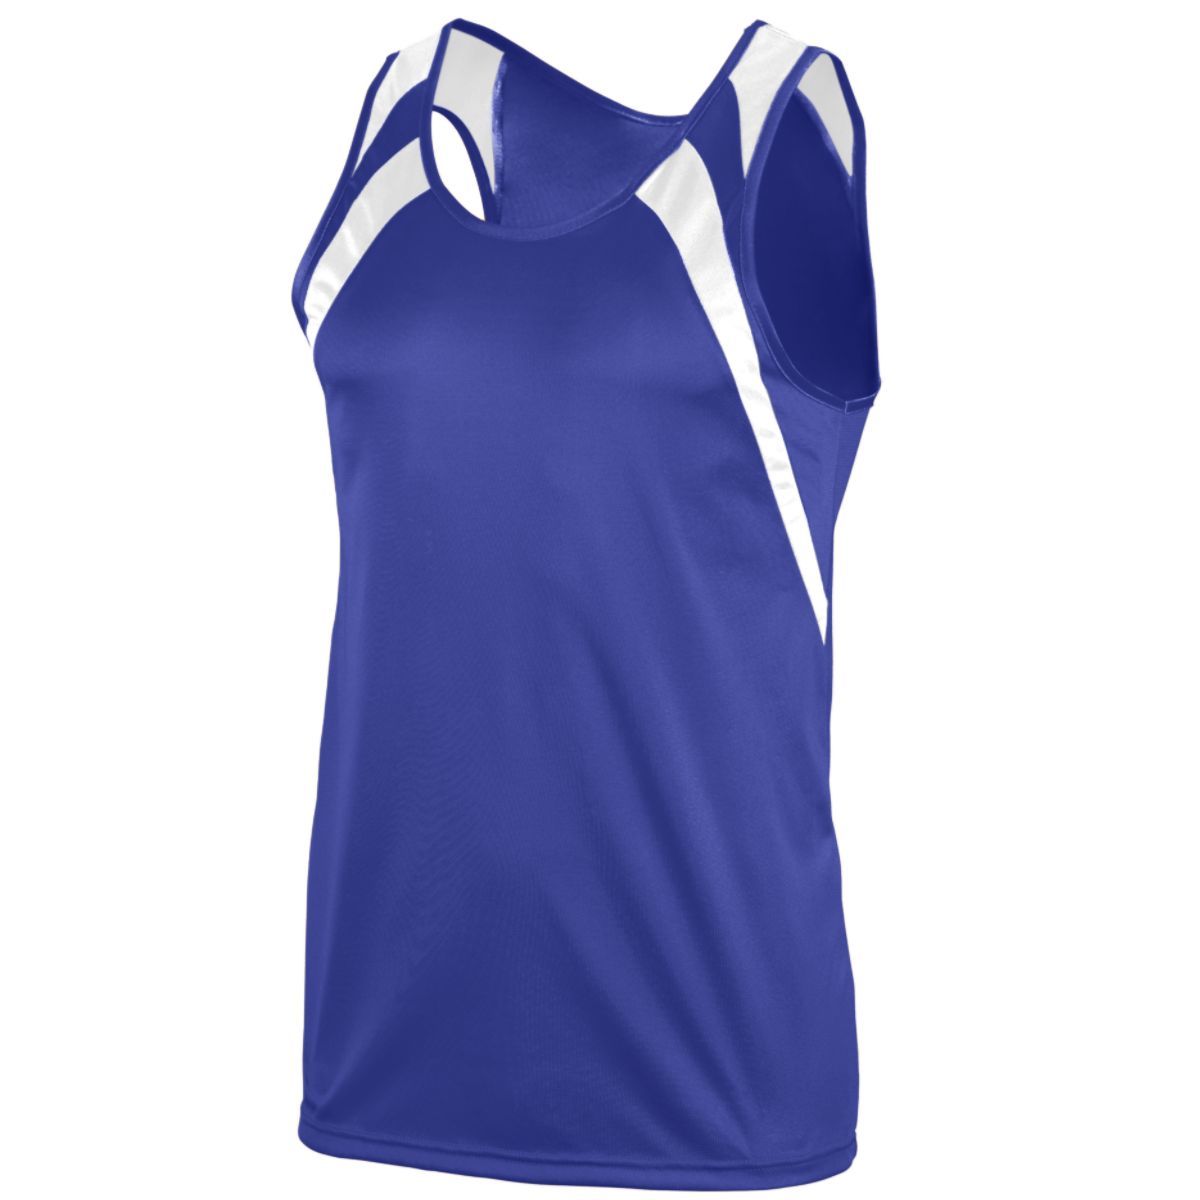 Wicking Tank With Shoulder Insert 311